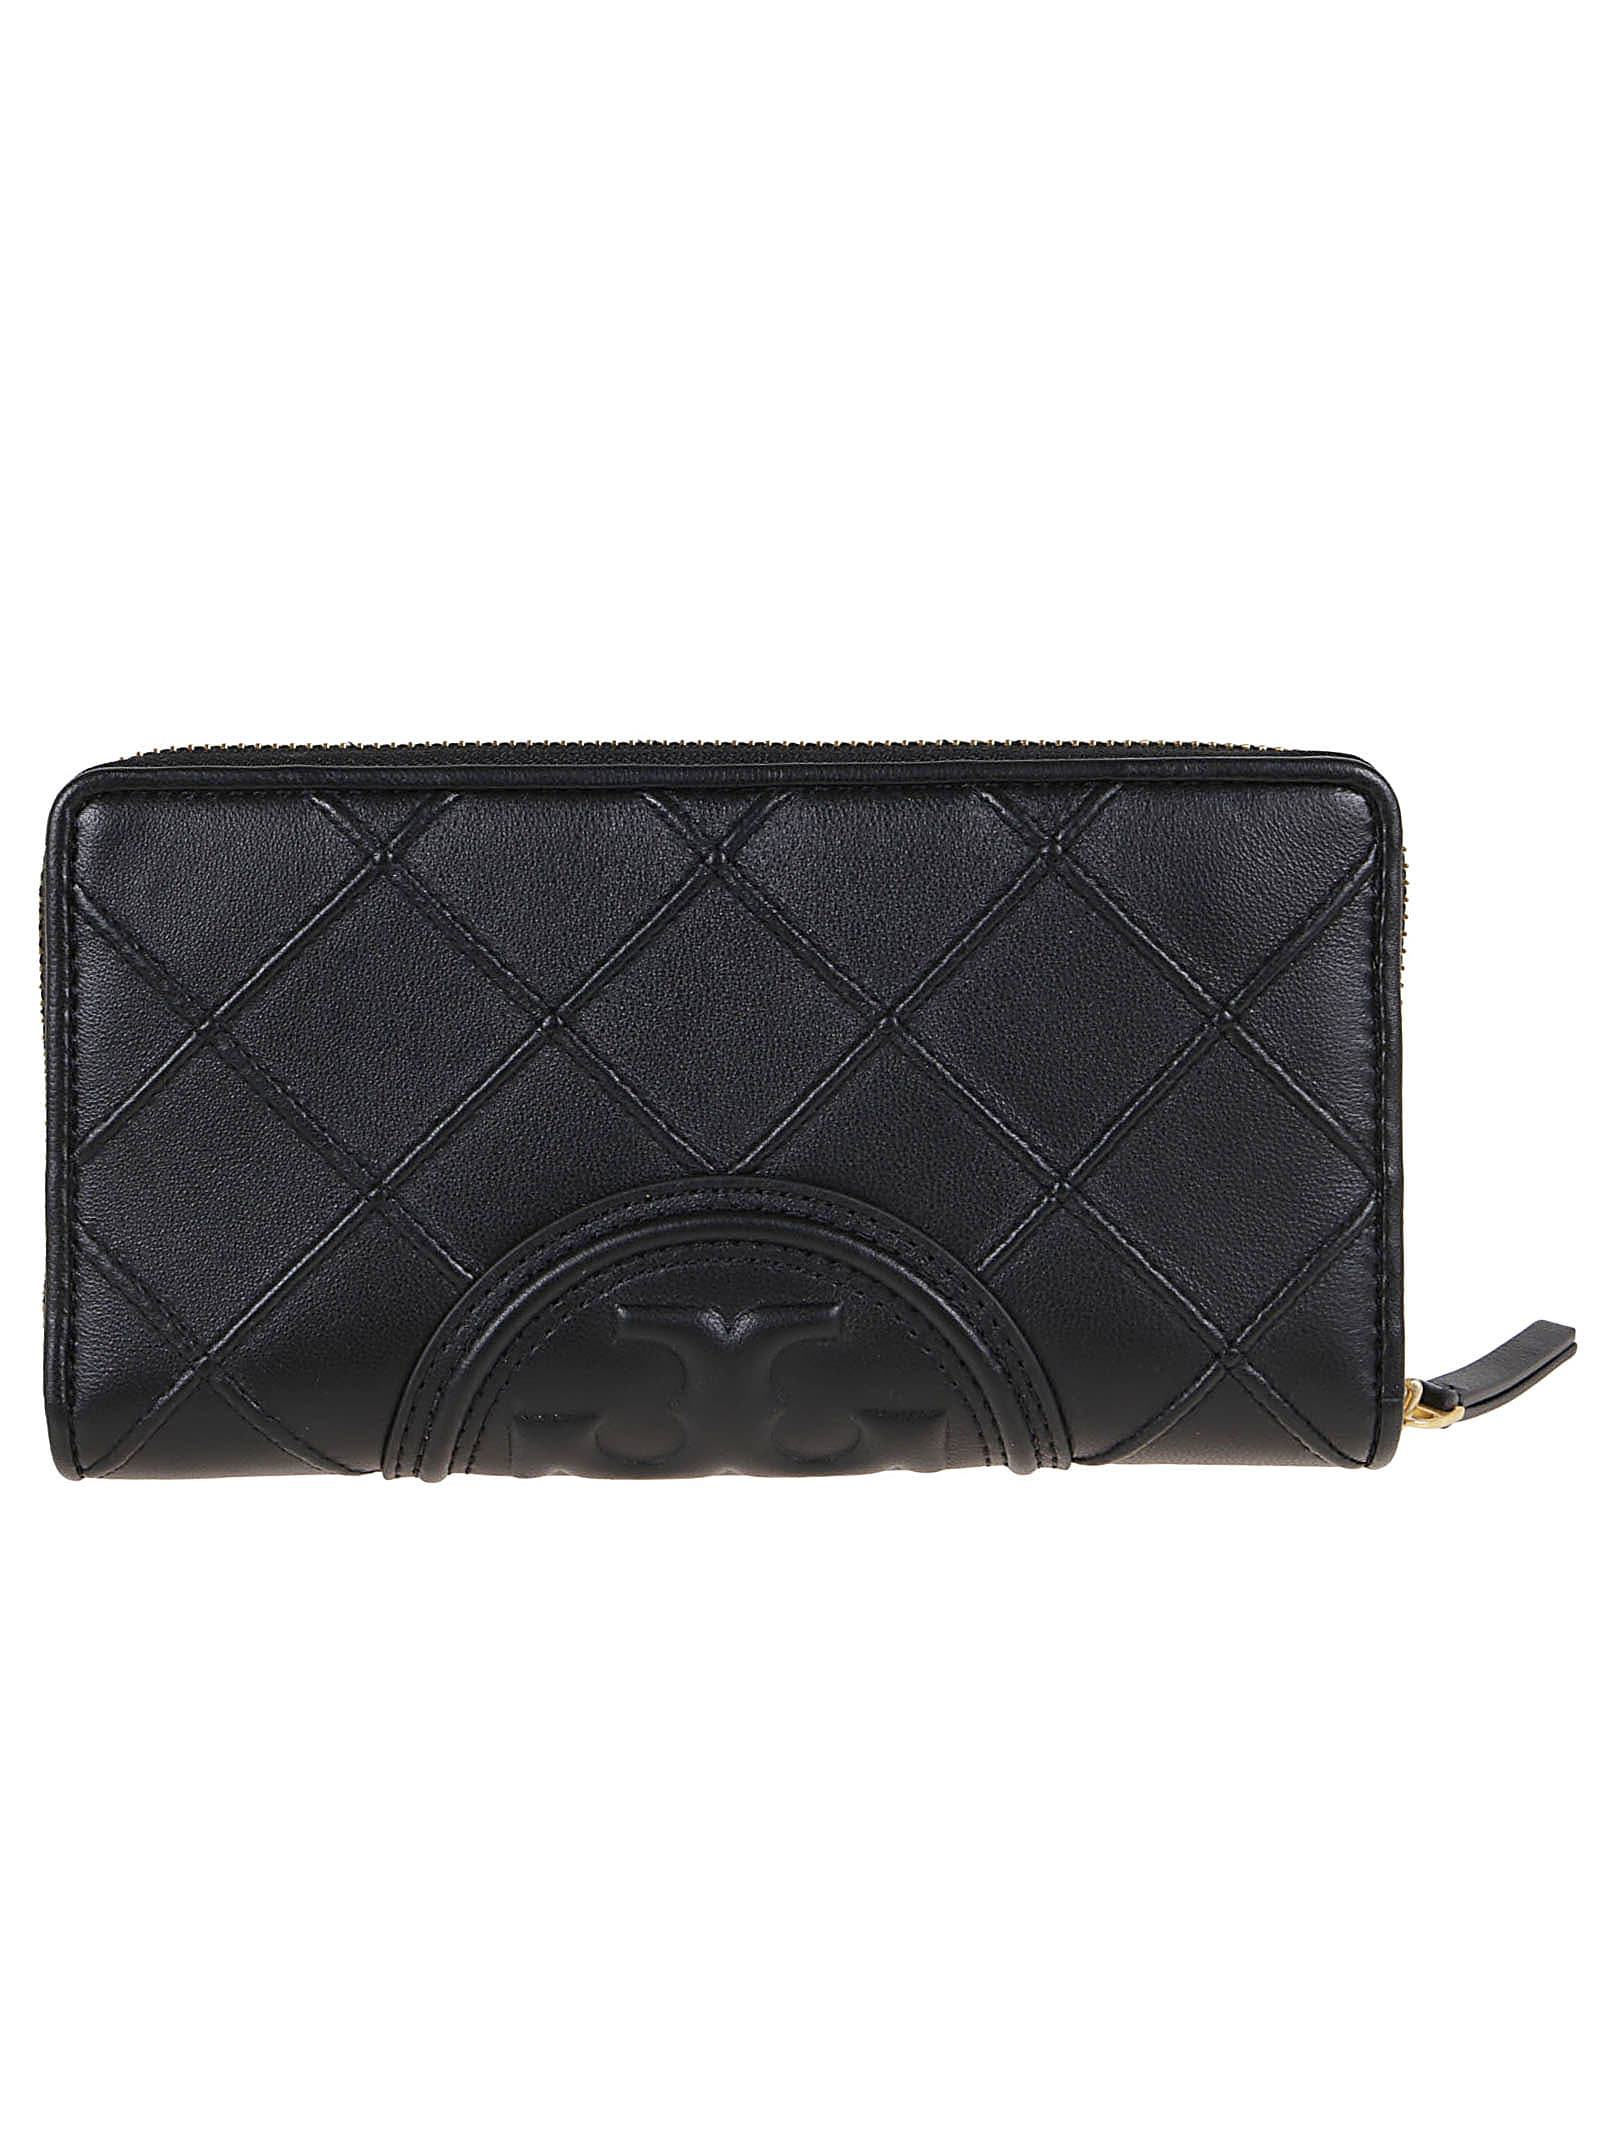 Tory Burch Taylor Leather Zip Continental Wallet